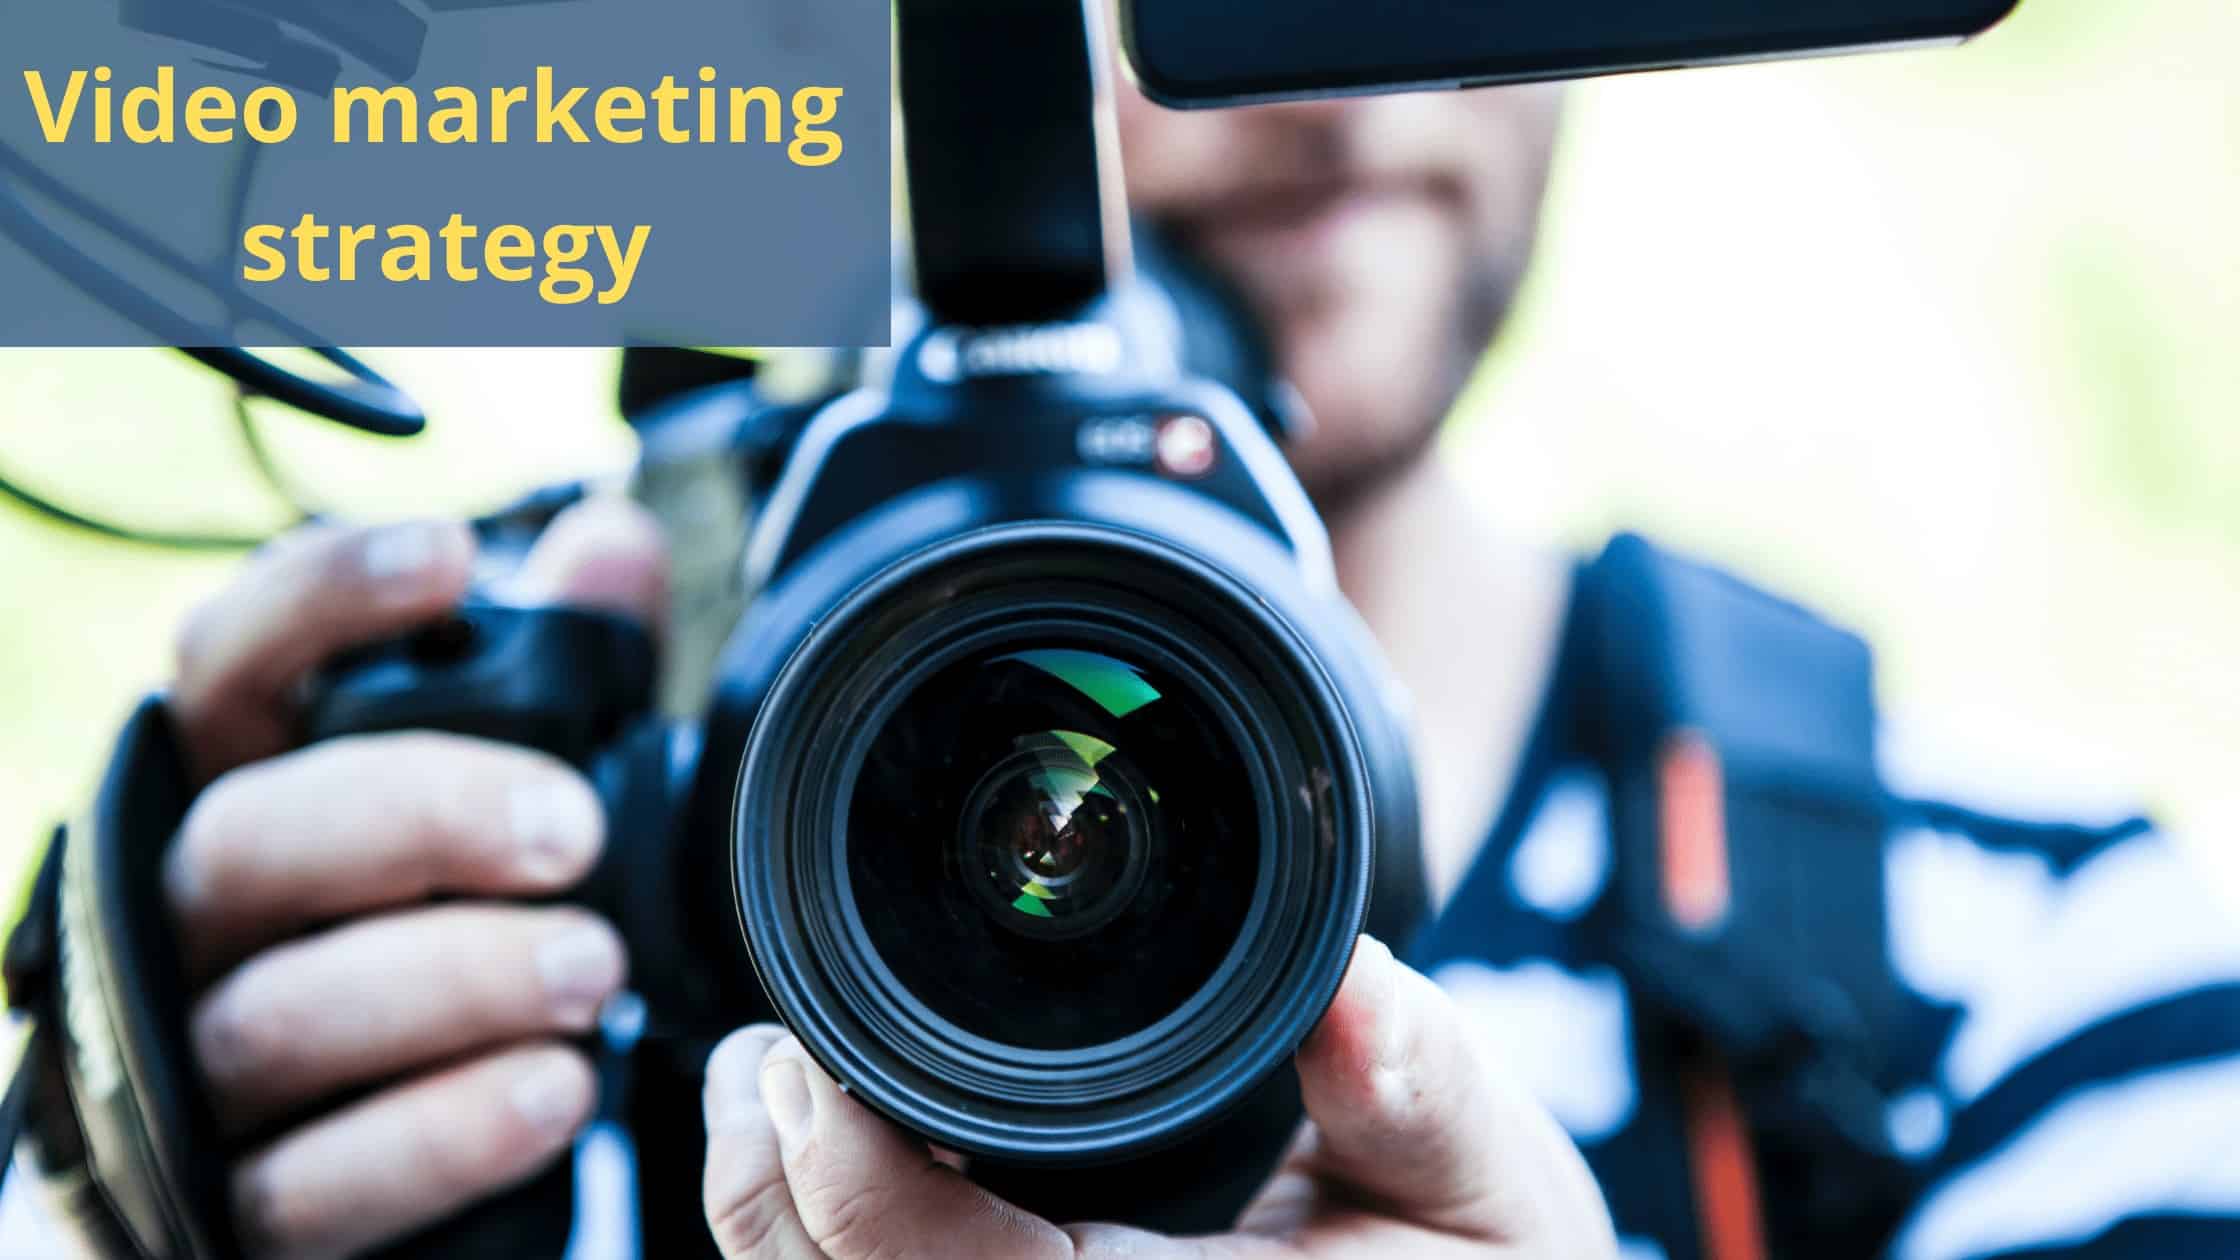 Video marketing strategy and types